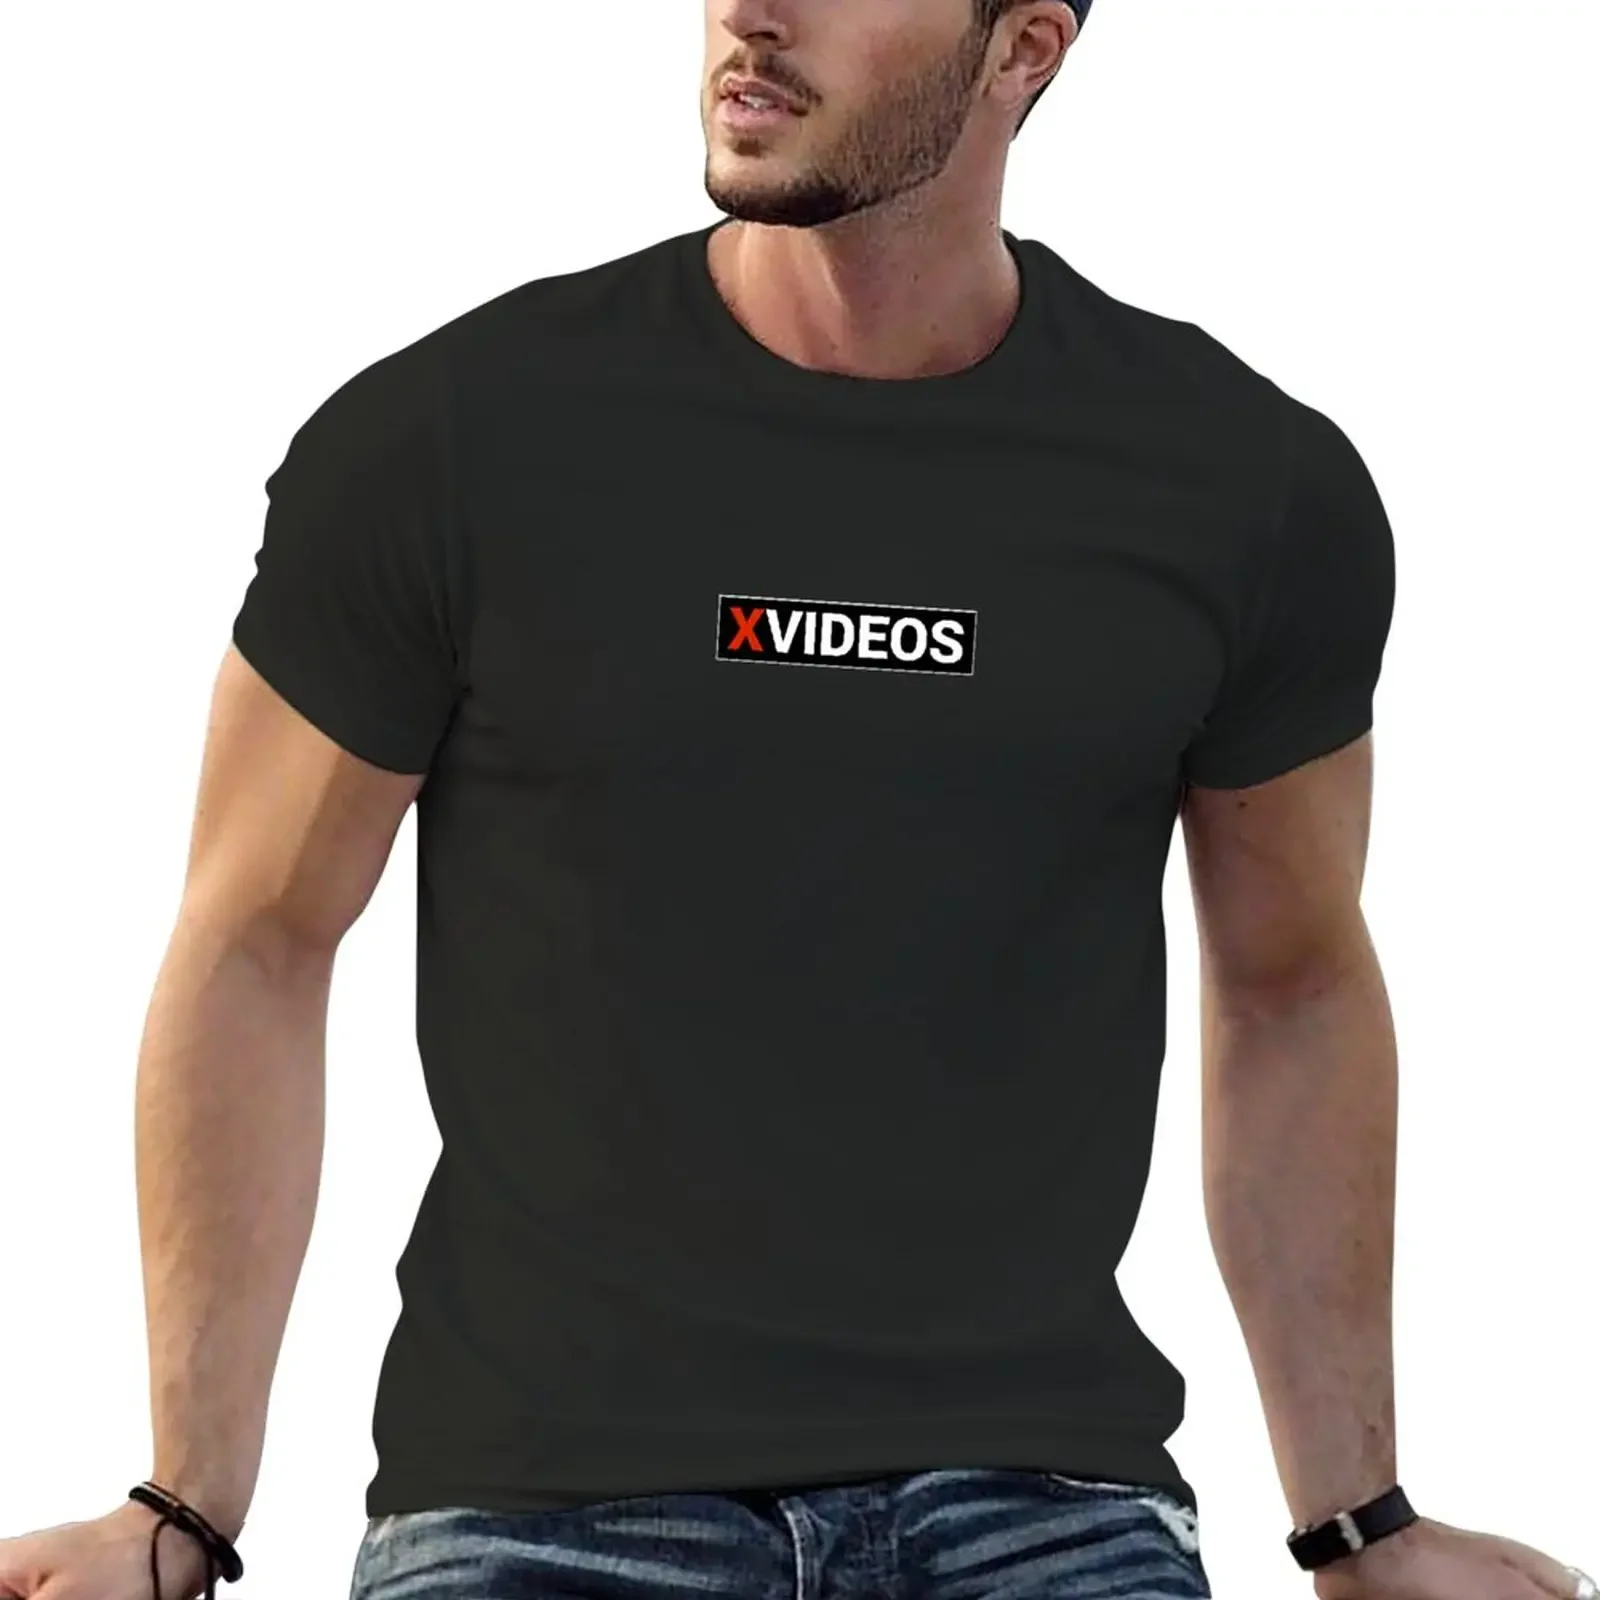 Xvideos official T-Shirt boys animal print anime hippie clothes oversized t shirts for men